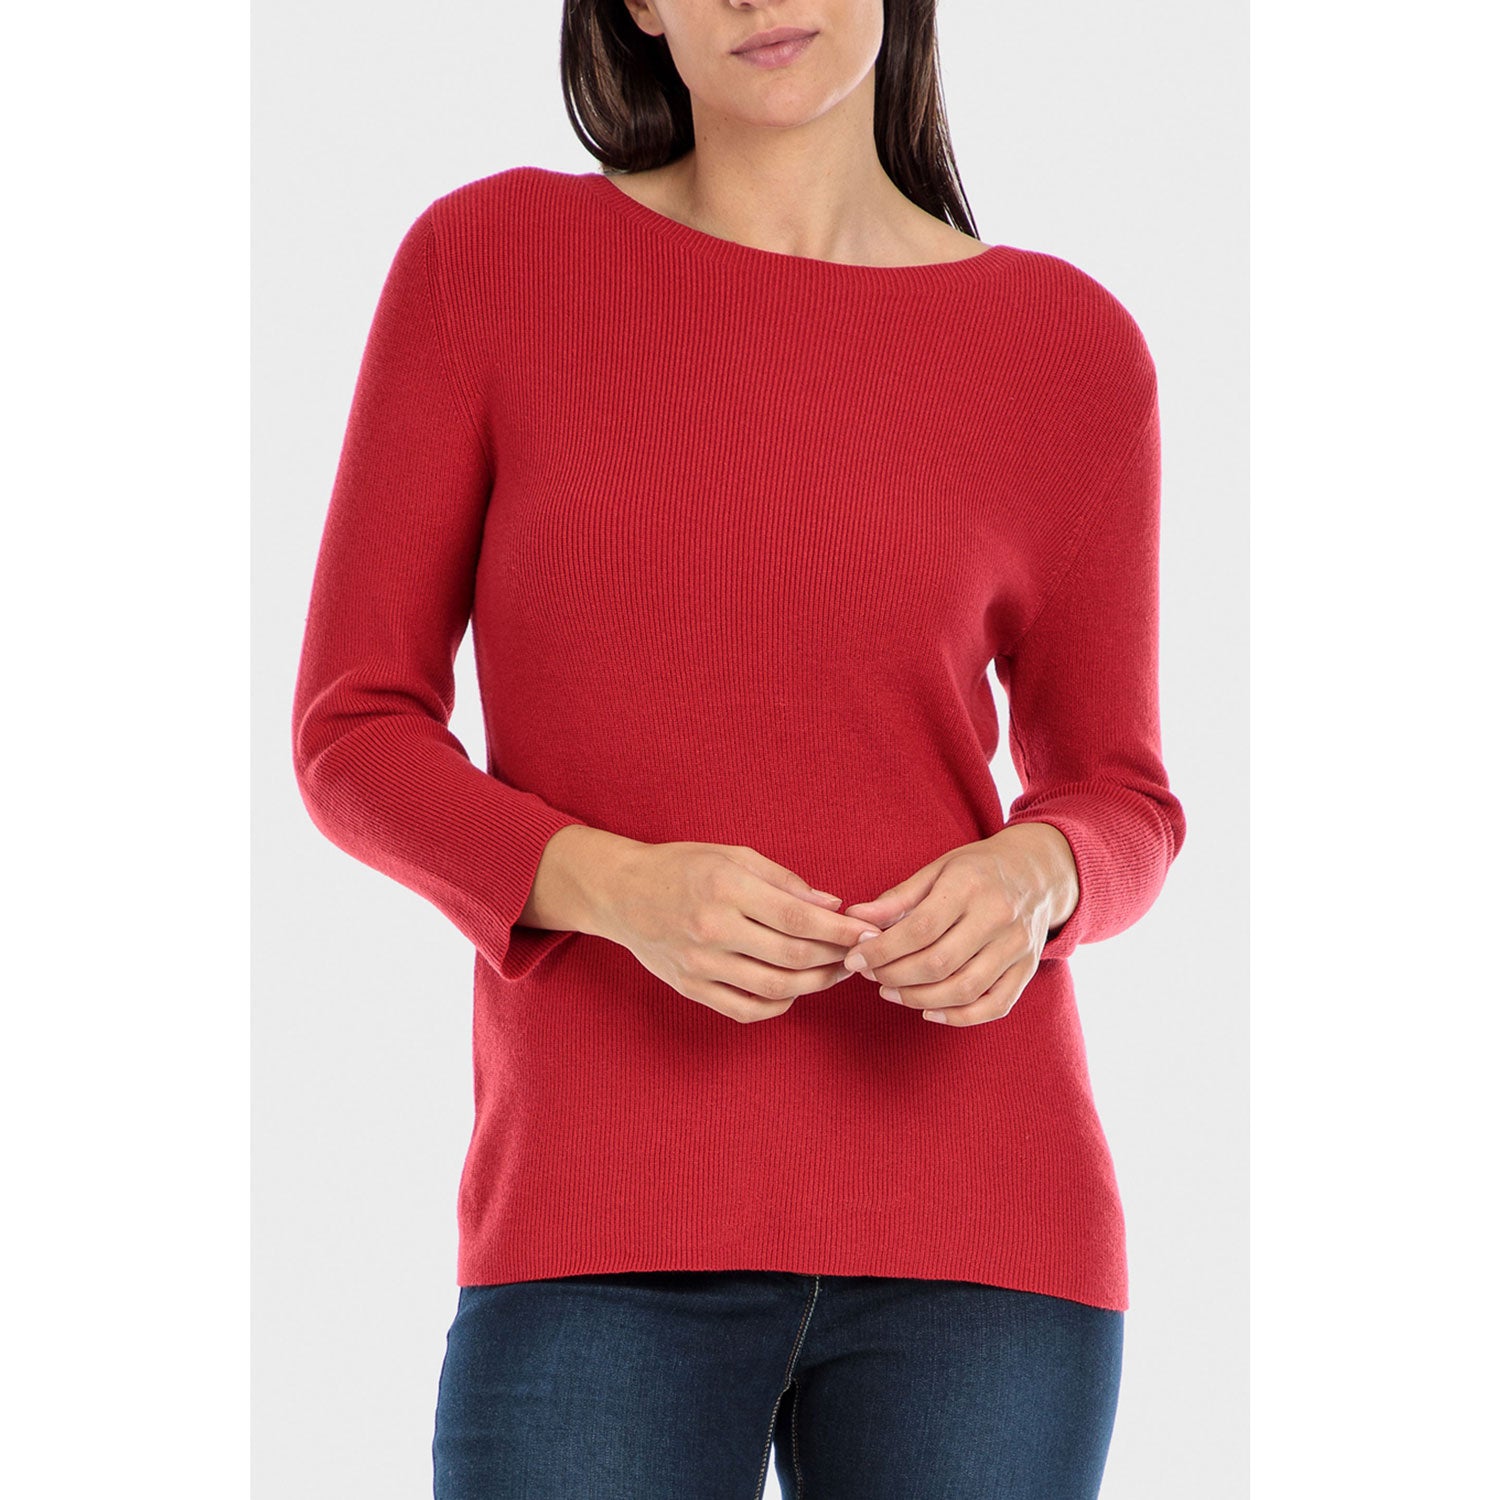 Punt Roma 3/4 Length Sweater - Red 1 Shaws Department Stores